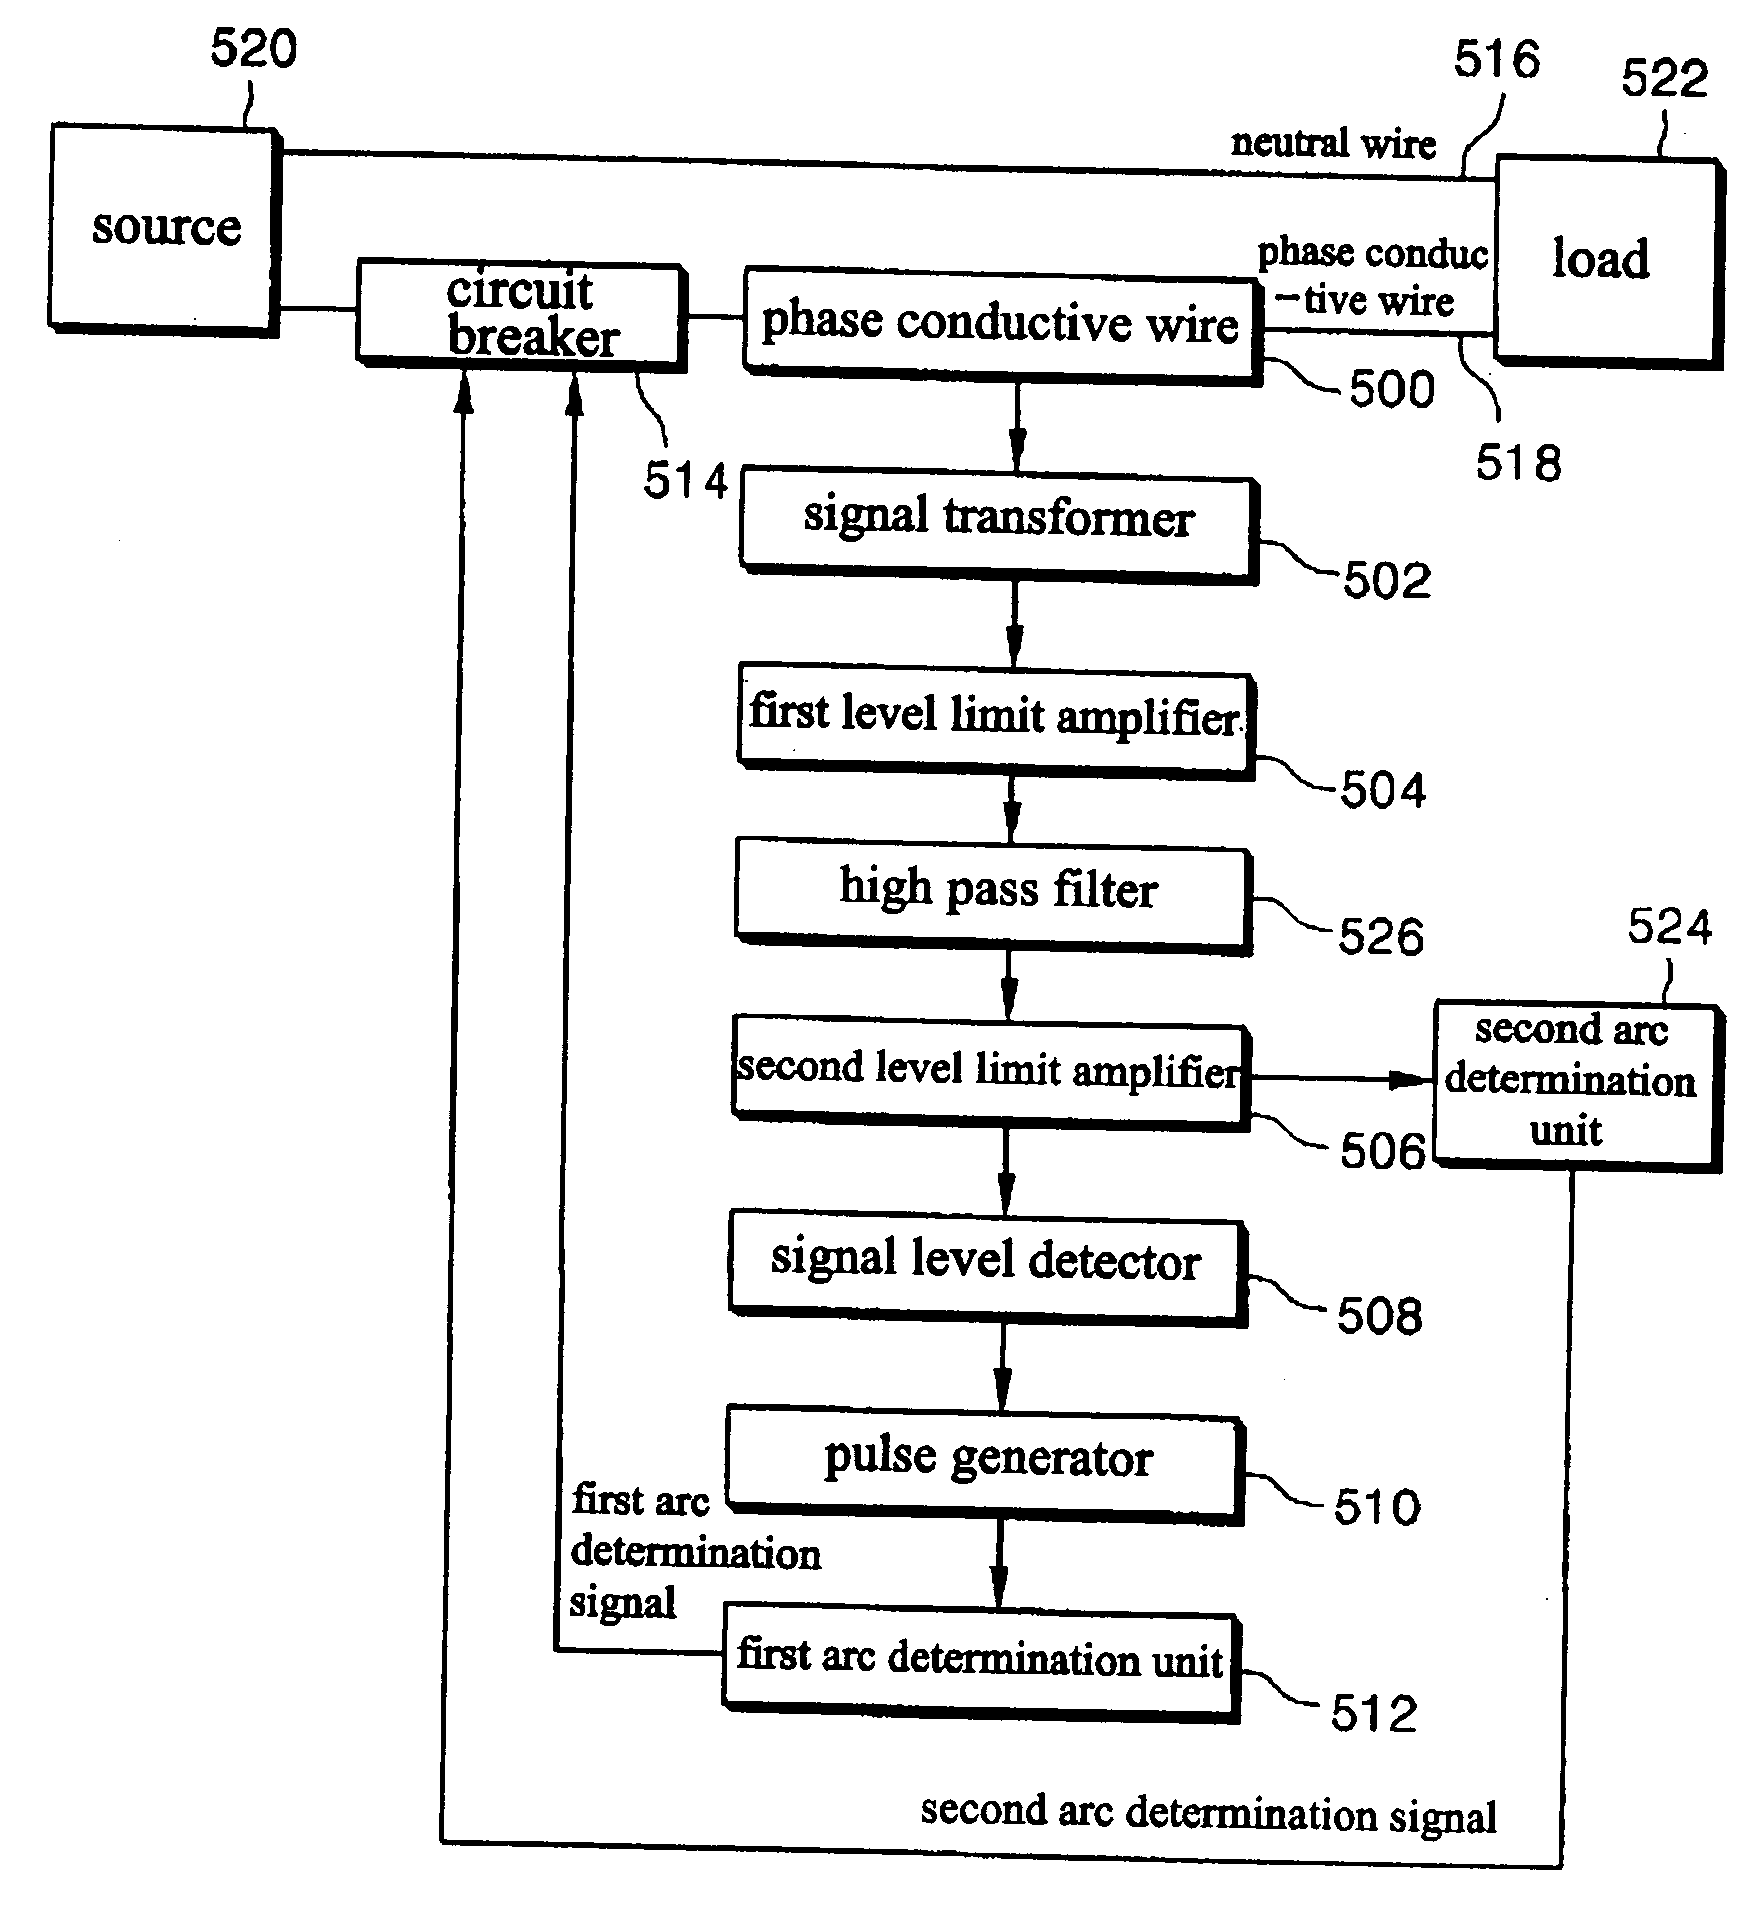 Apparatus for detecting arc fault